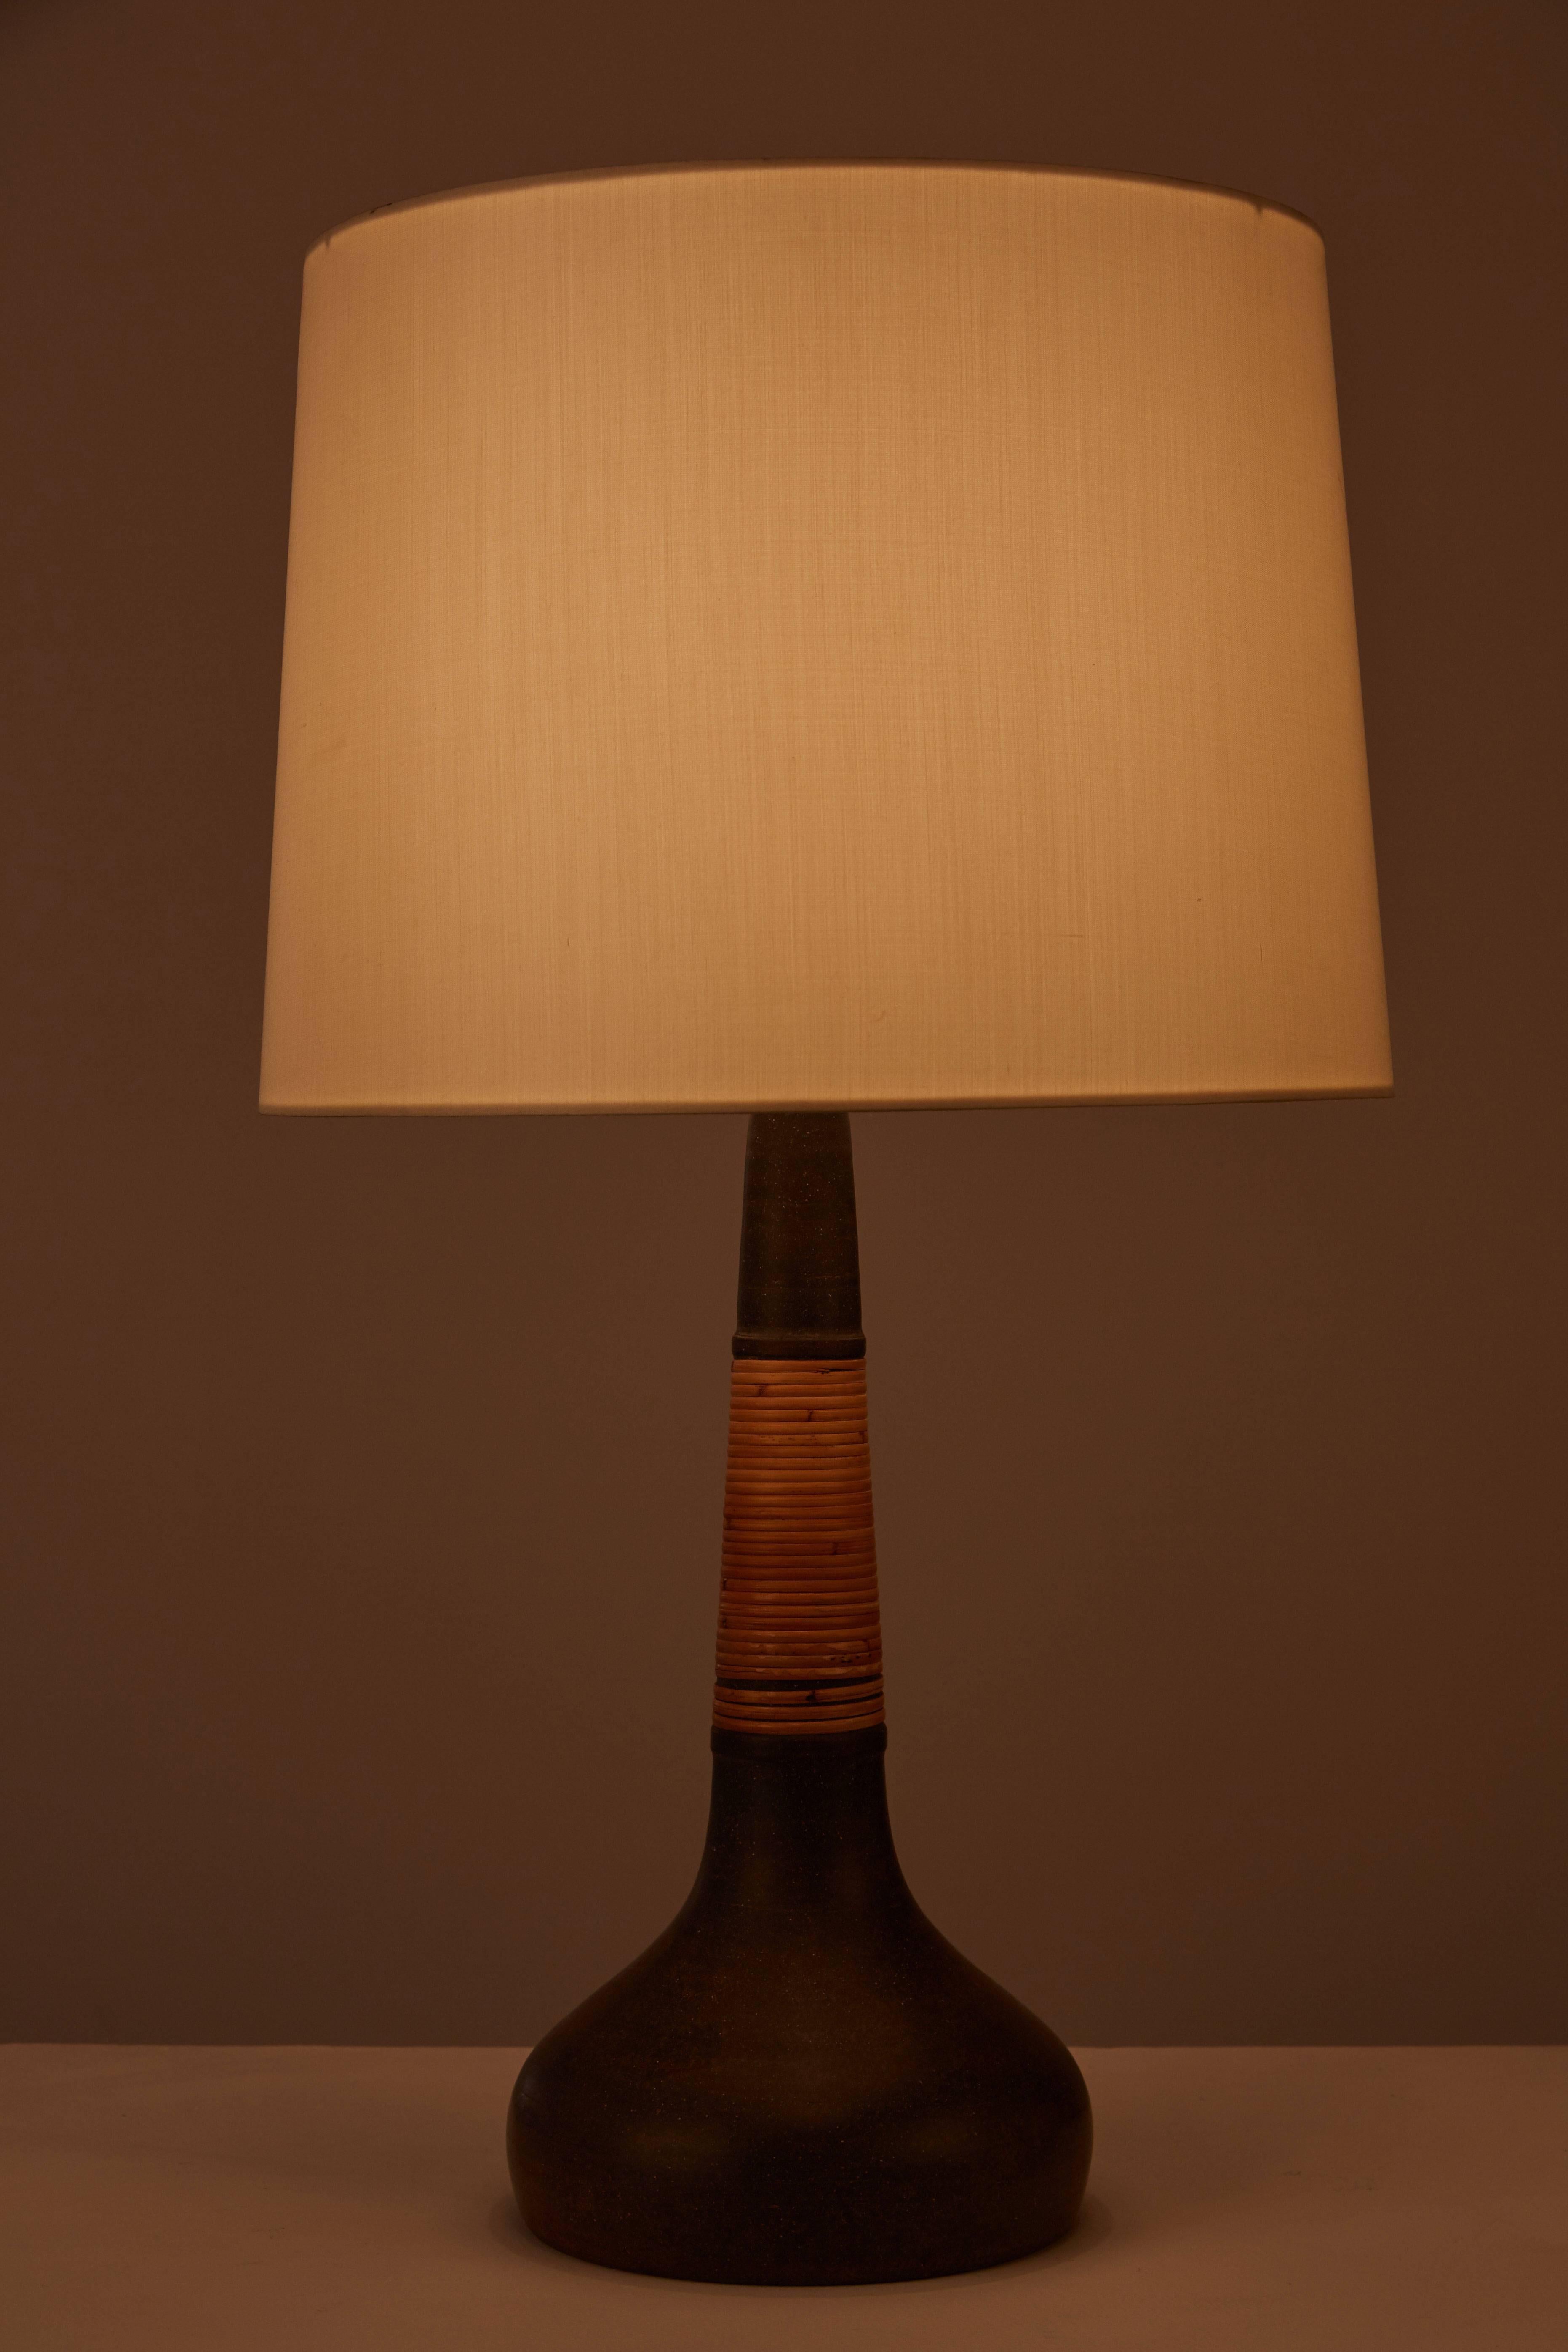 Two table lamps with round base and long tapering neck in deep brown stoneware with rattan wrapping. Custom silk shade. Made in Denmark in the 1960s. Retains Incised “HAK” and “Le Klint” on bottom of light. Takes an E27 60w maximum bulb. Priced